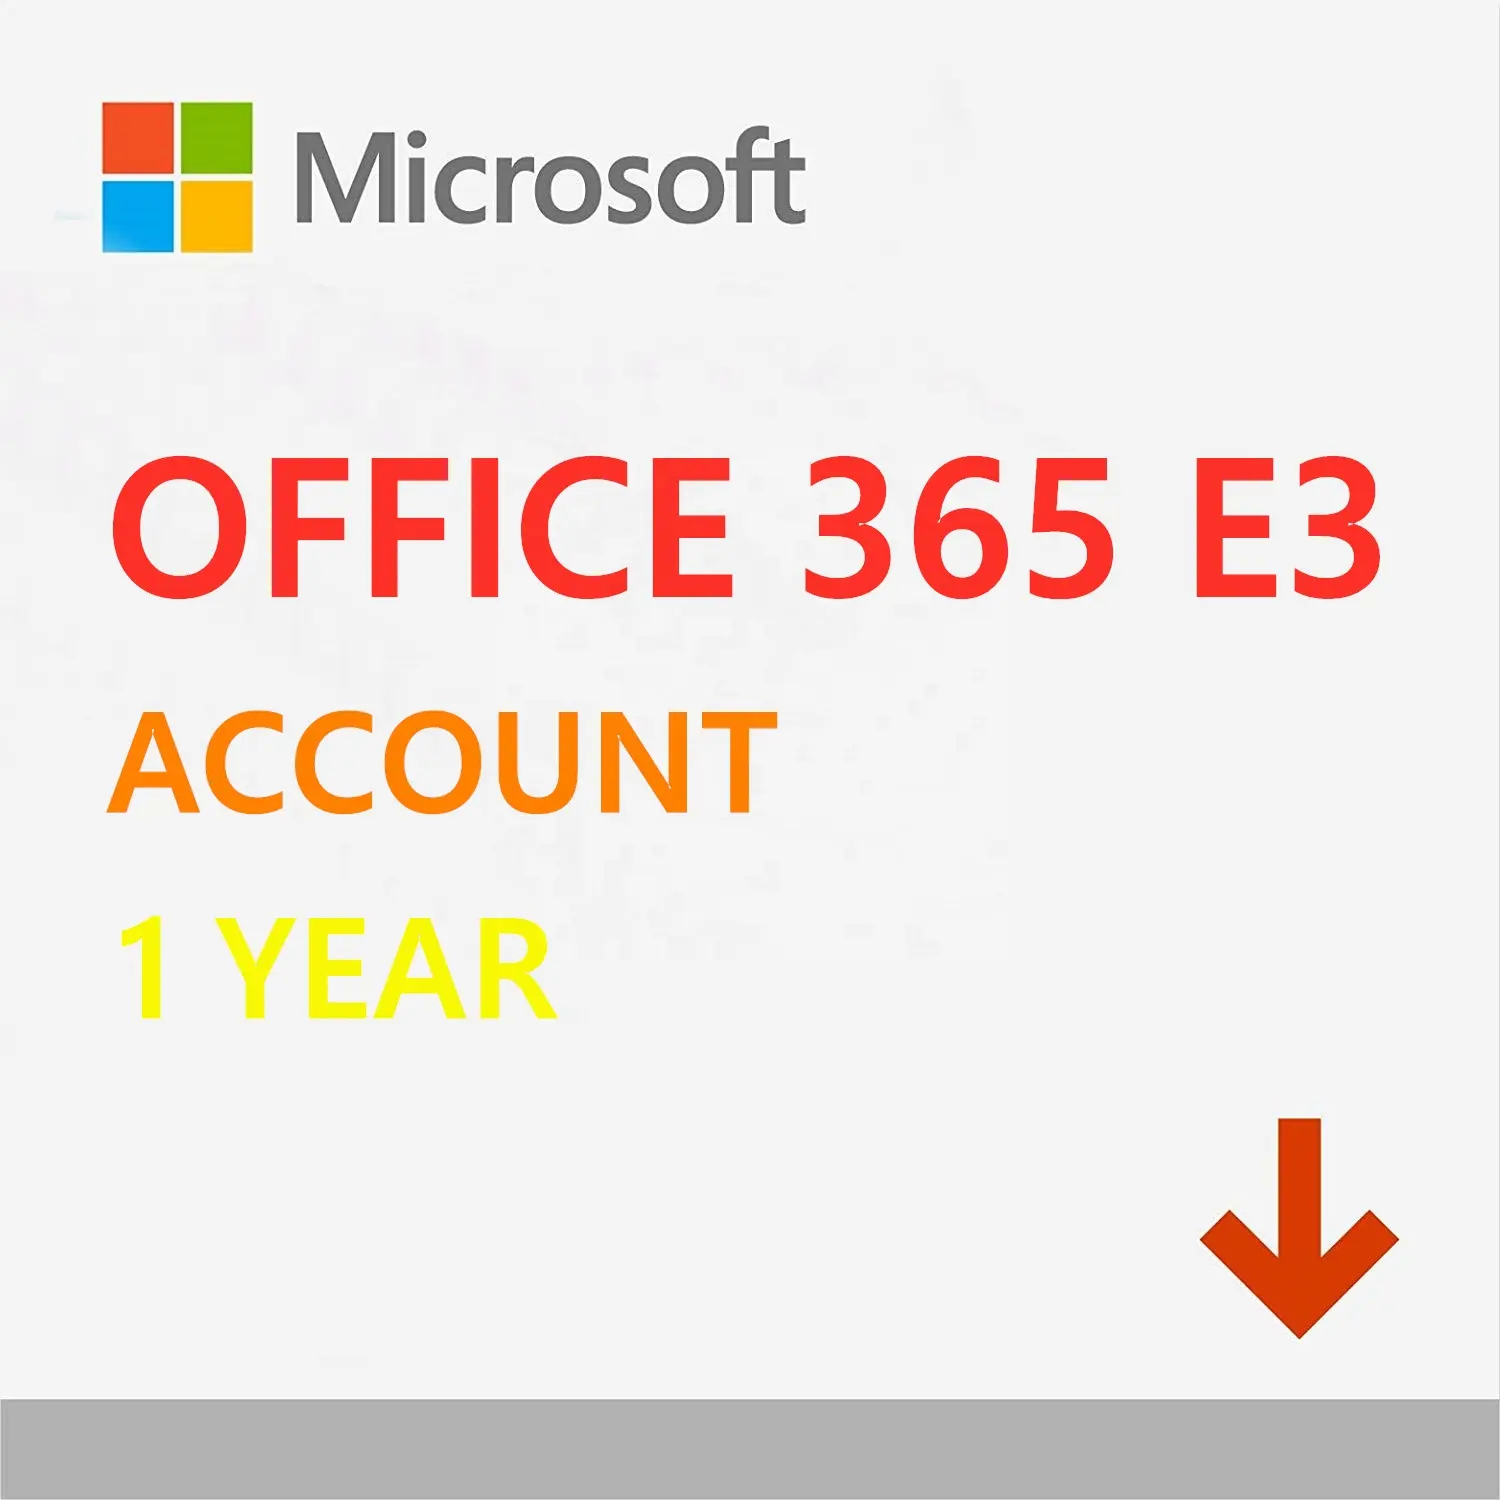 office 365 account MS office 365 E3 account 1 year office 365